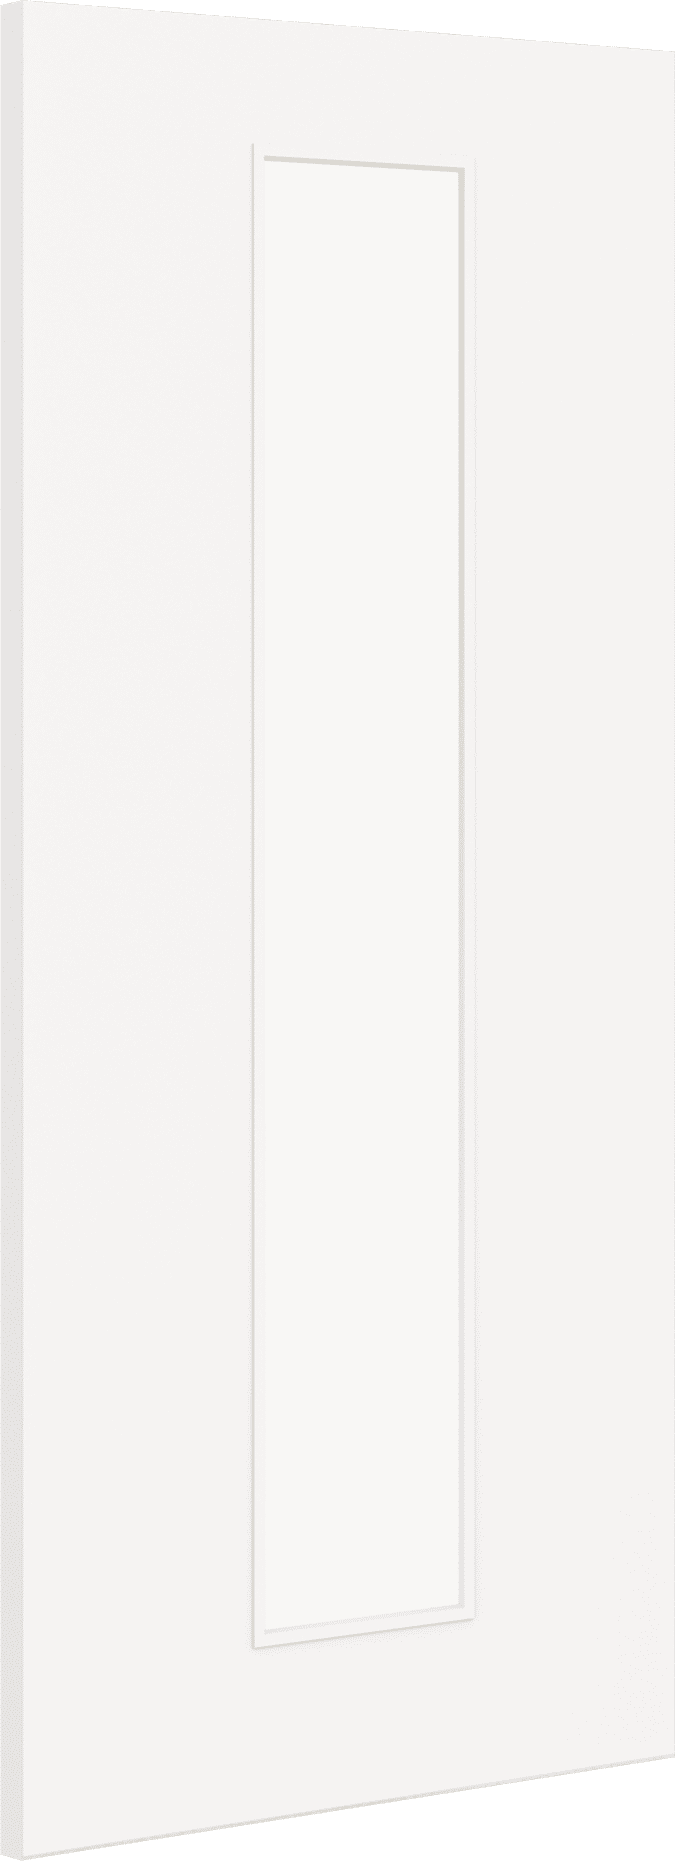 2040mm x 826mm x 44mm Architectural Paint Grade White 10 Clear Glazed Fire Door Blank